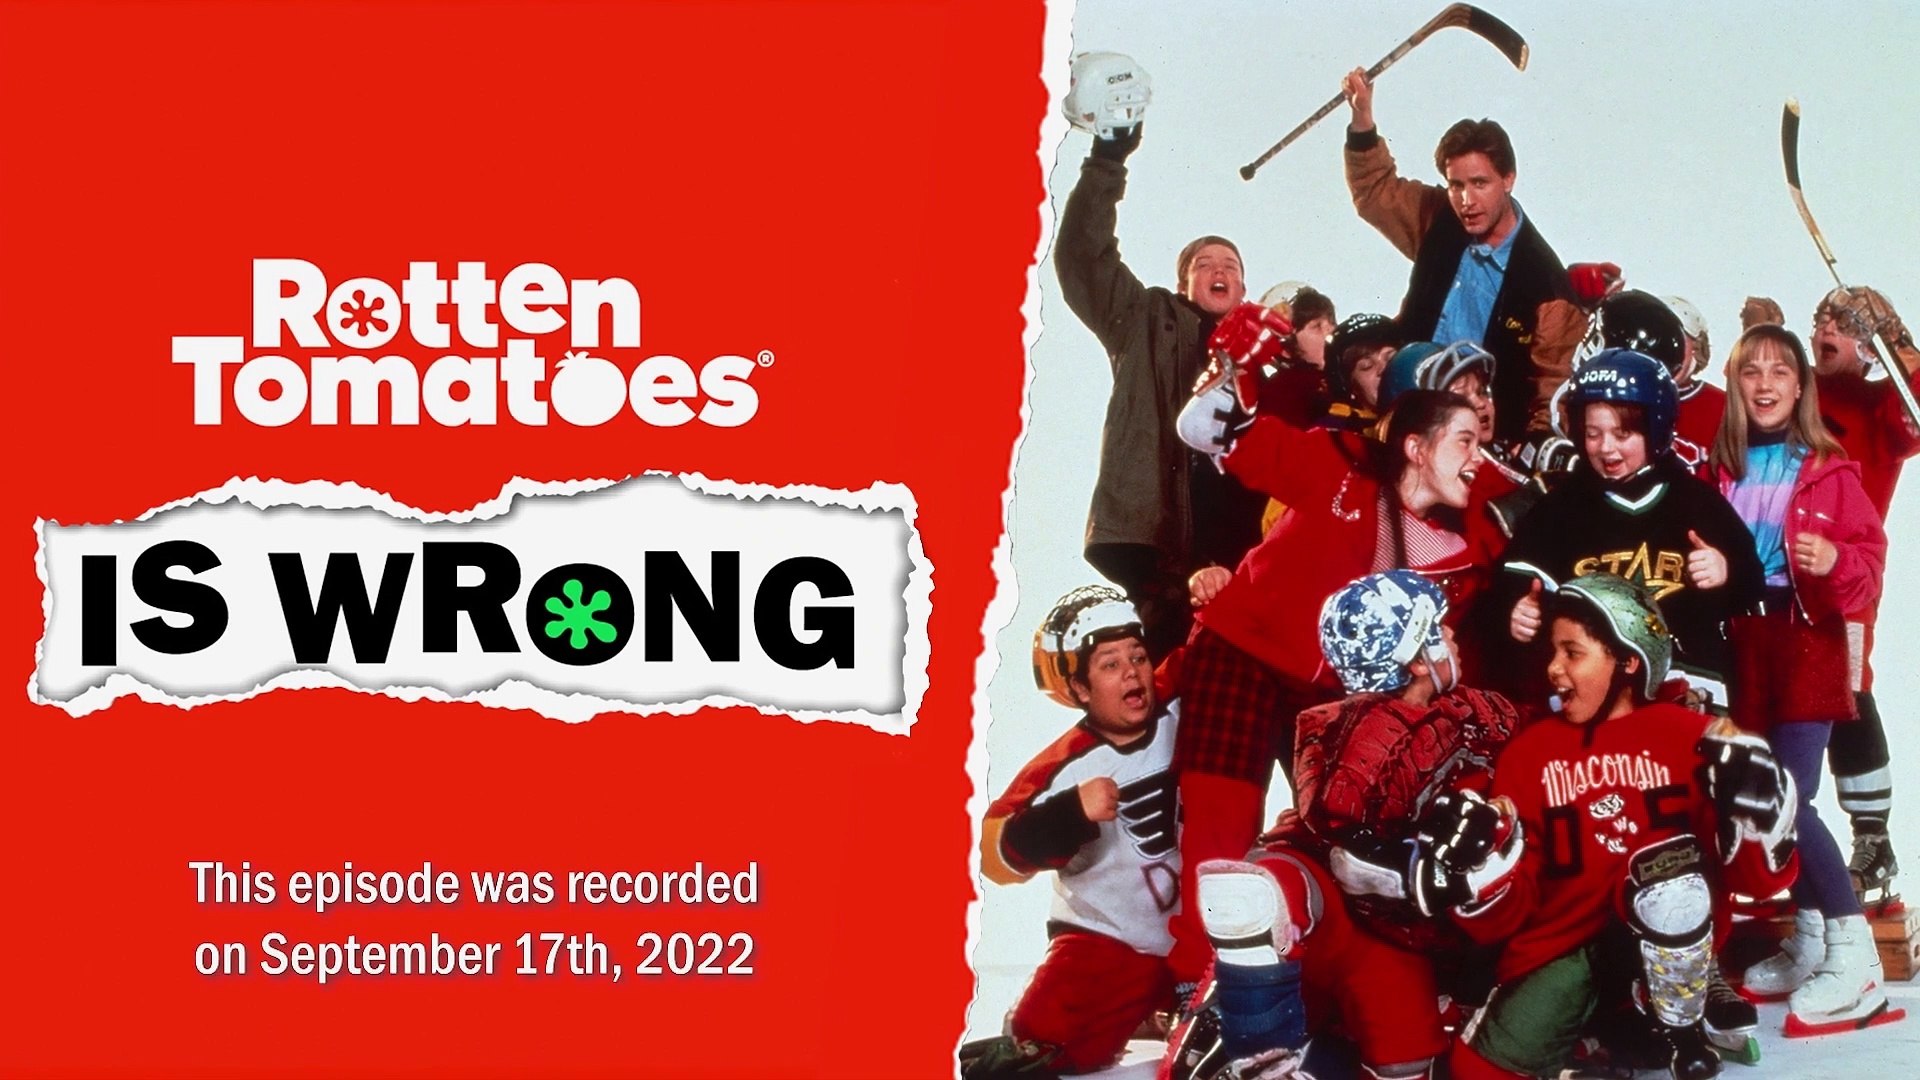 Mighty Ducks - Trailers & Videos - Rotten Tomatoes